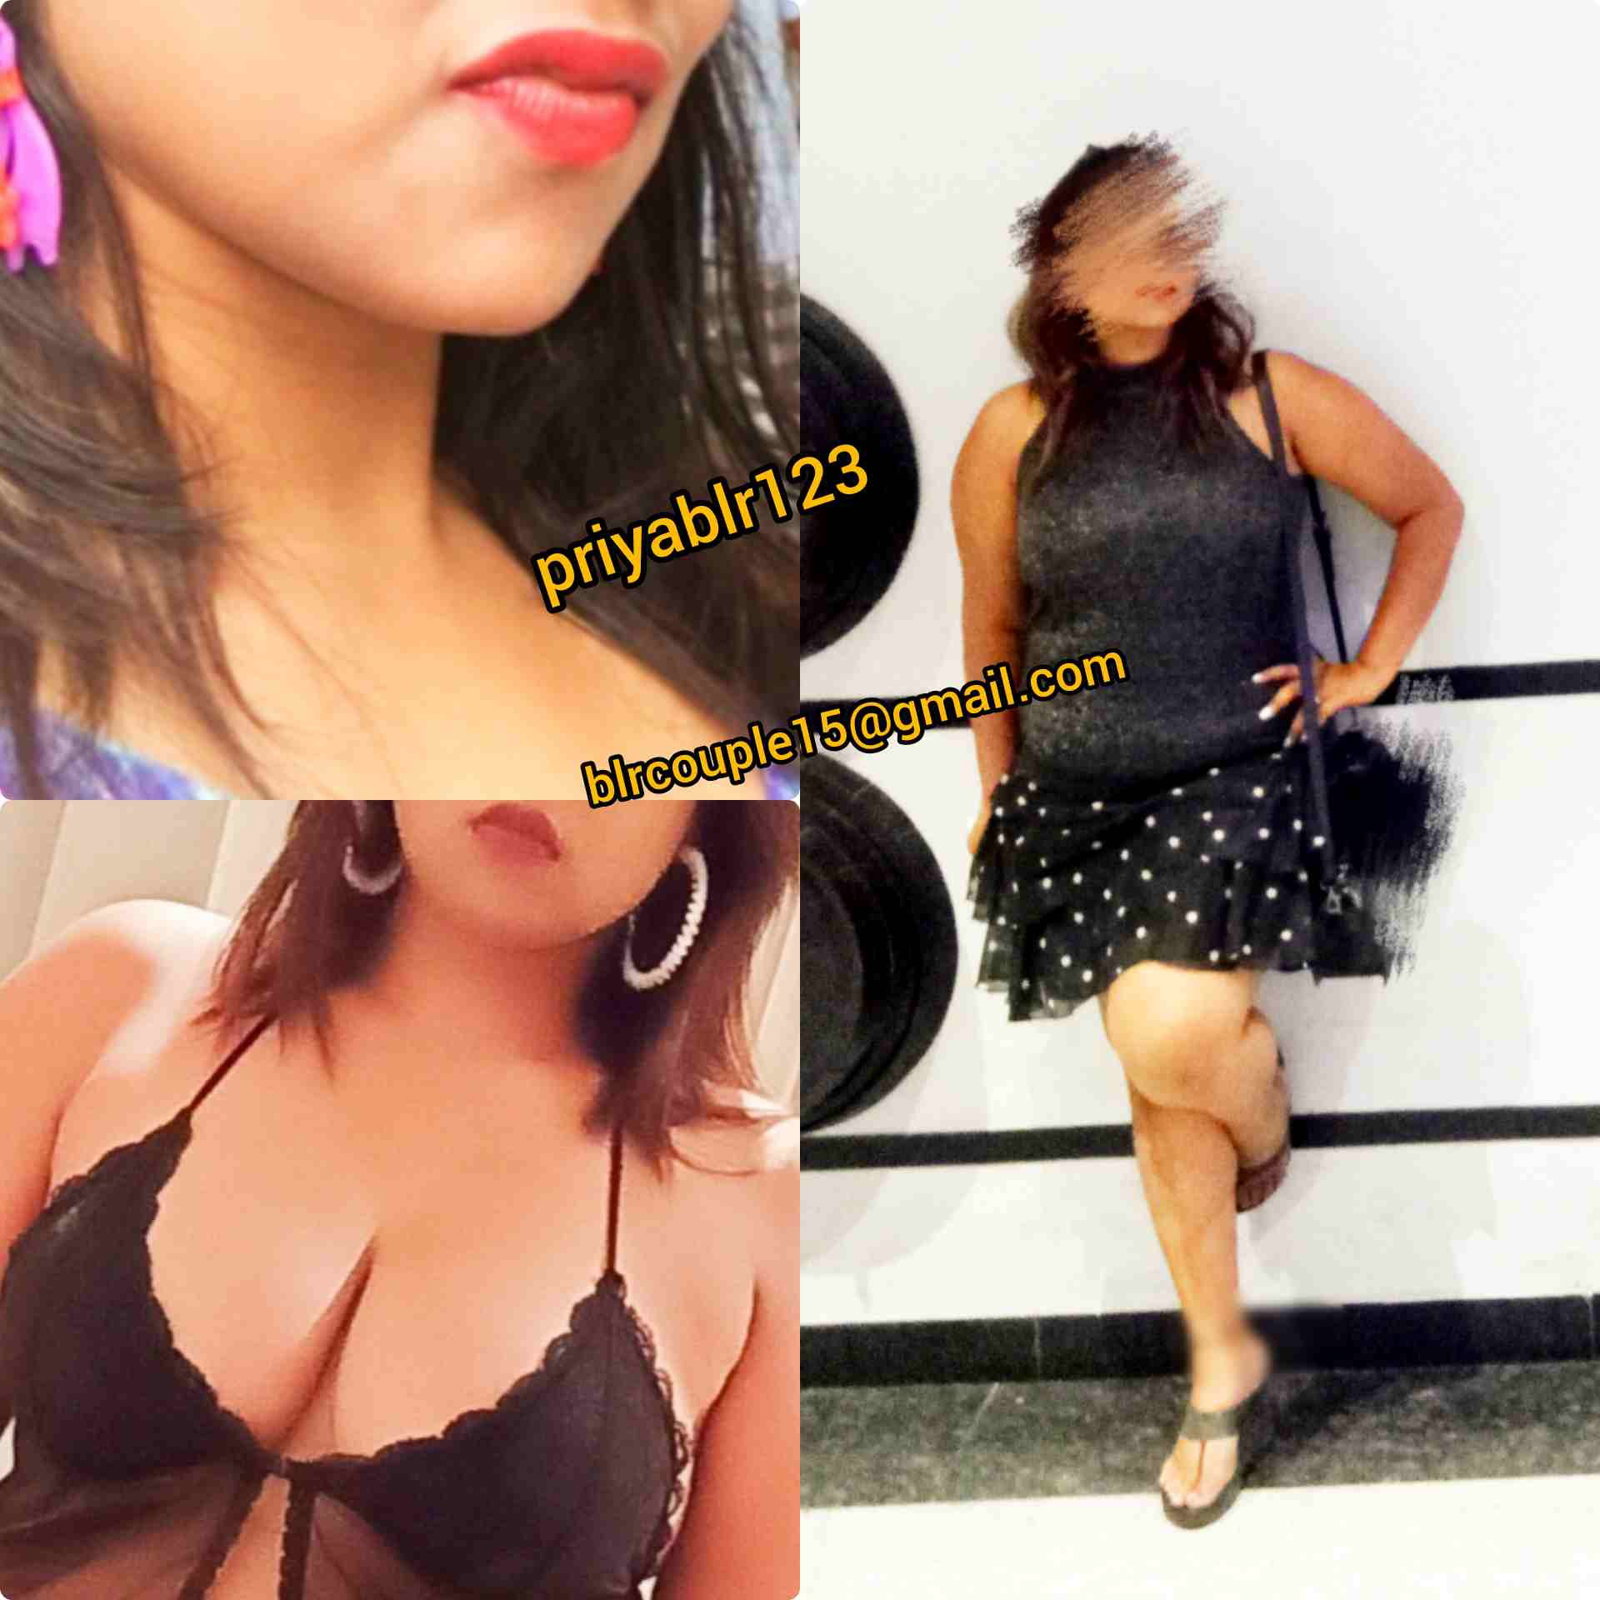 Shared Photo by priyablr123 with the username @priyablr123, who is a star user,  April 18, 2020 at 7:51 AM. The post is about the topic Cheating Wifes/Girlfriends and the text says 'Dirty comments required.
Priya slutty cleavage, smoochable lips and sexy figure below for cumming!
Guys we r married Cpl from Bangalore India. She is an Elite Companion for alone meetings as well. Looking for decent males for fwb fun only.
Keep sharing..'